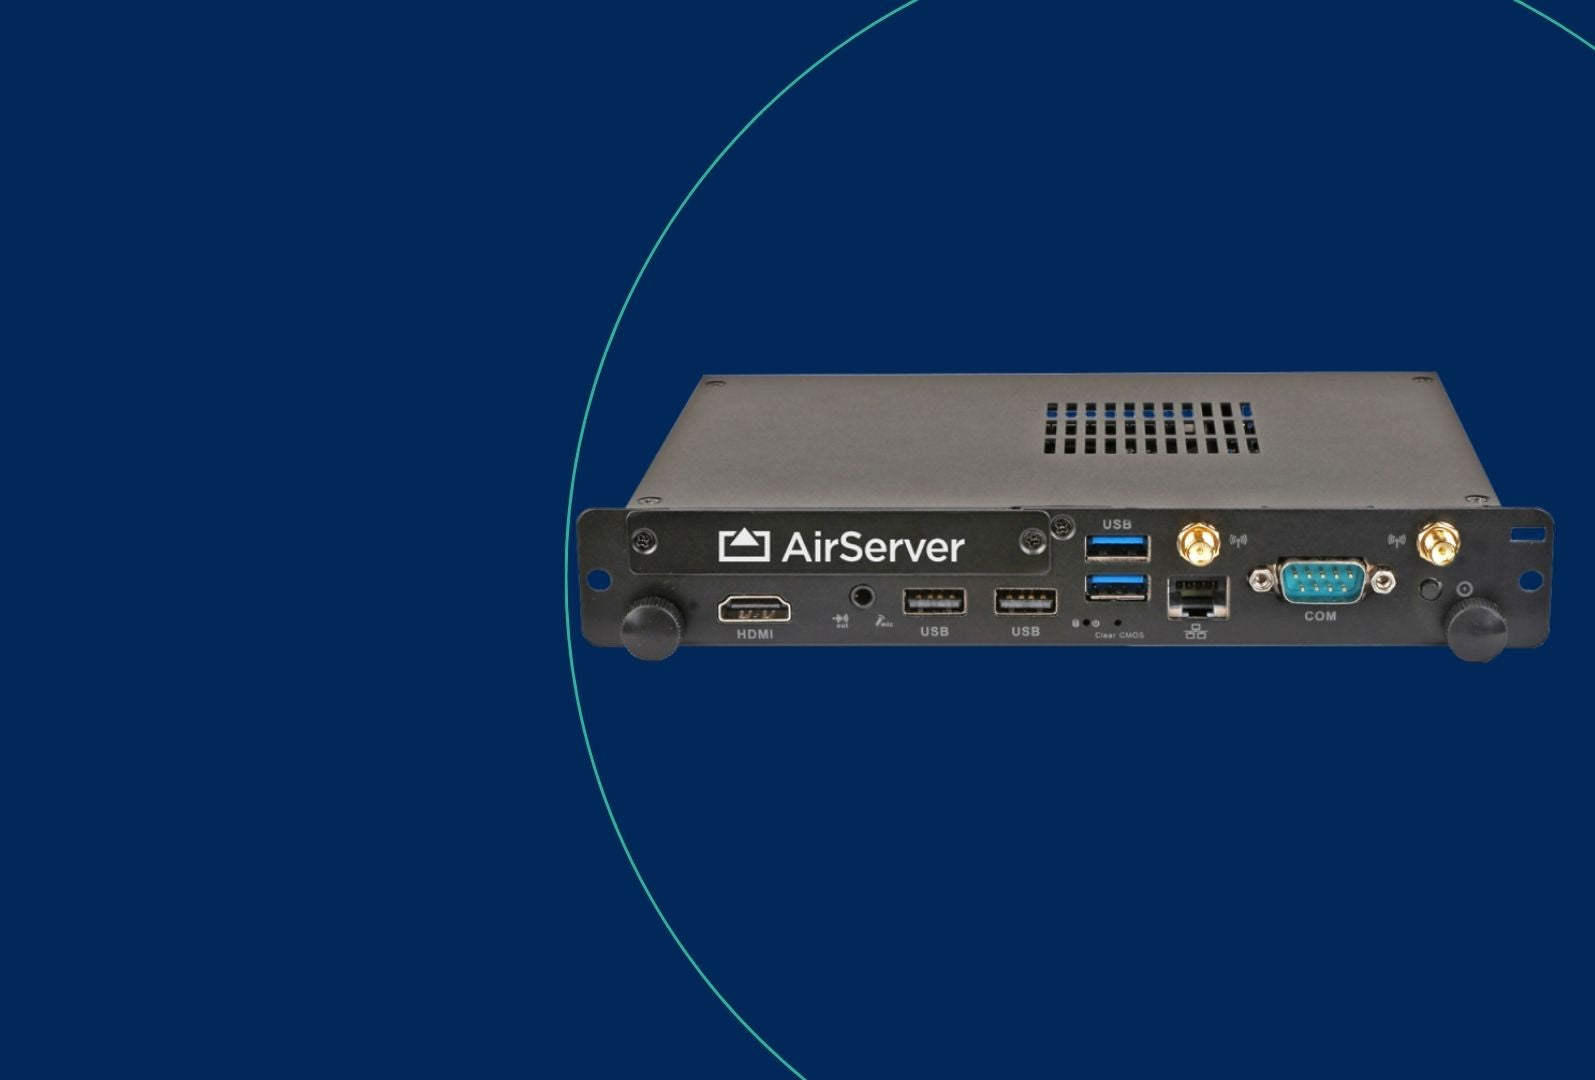 Airserver_OPS